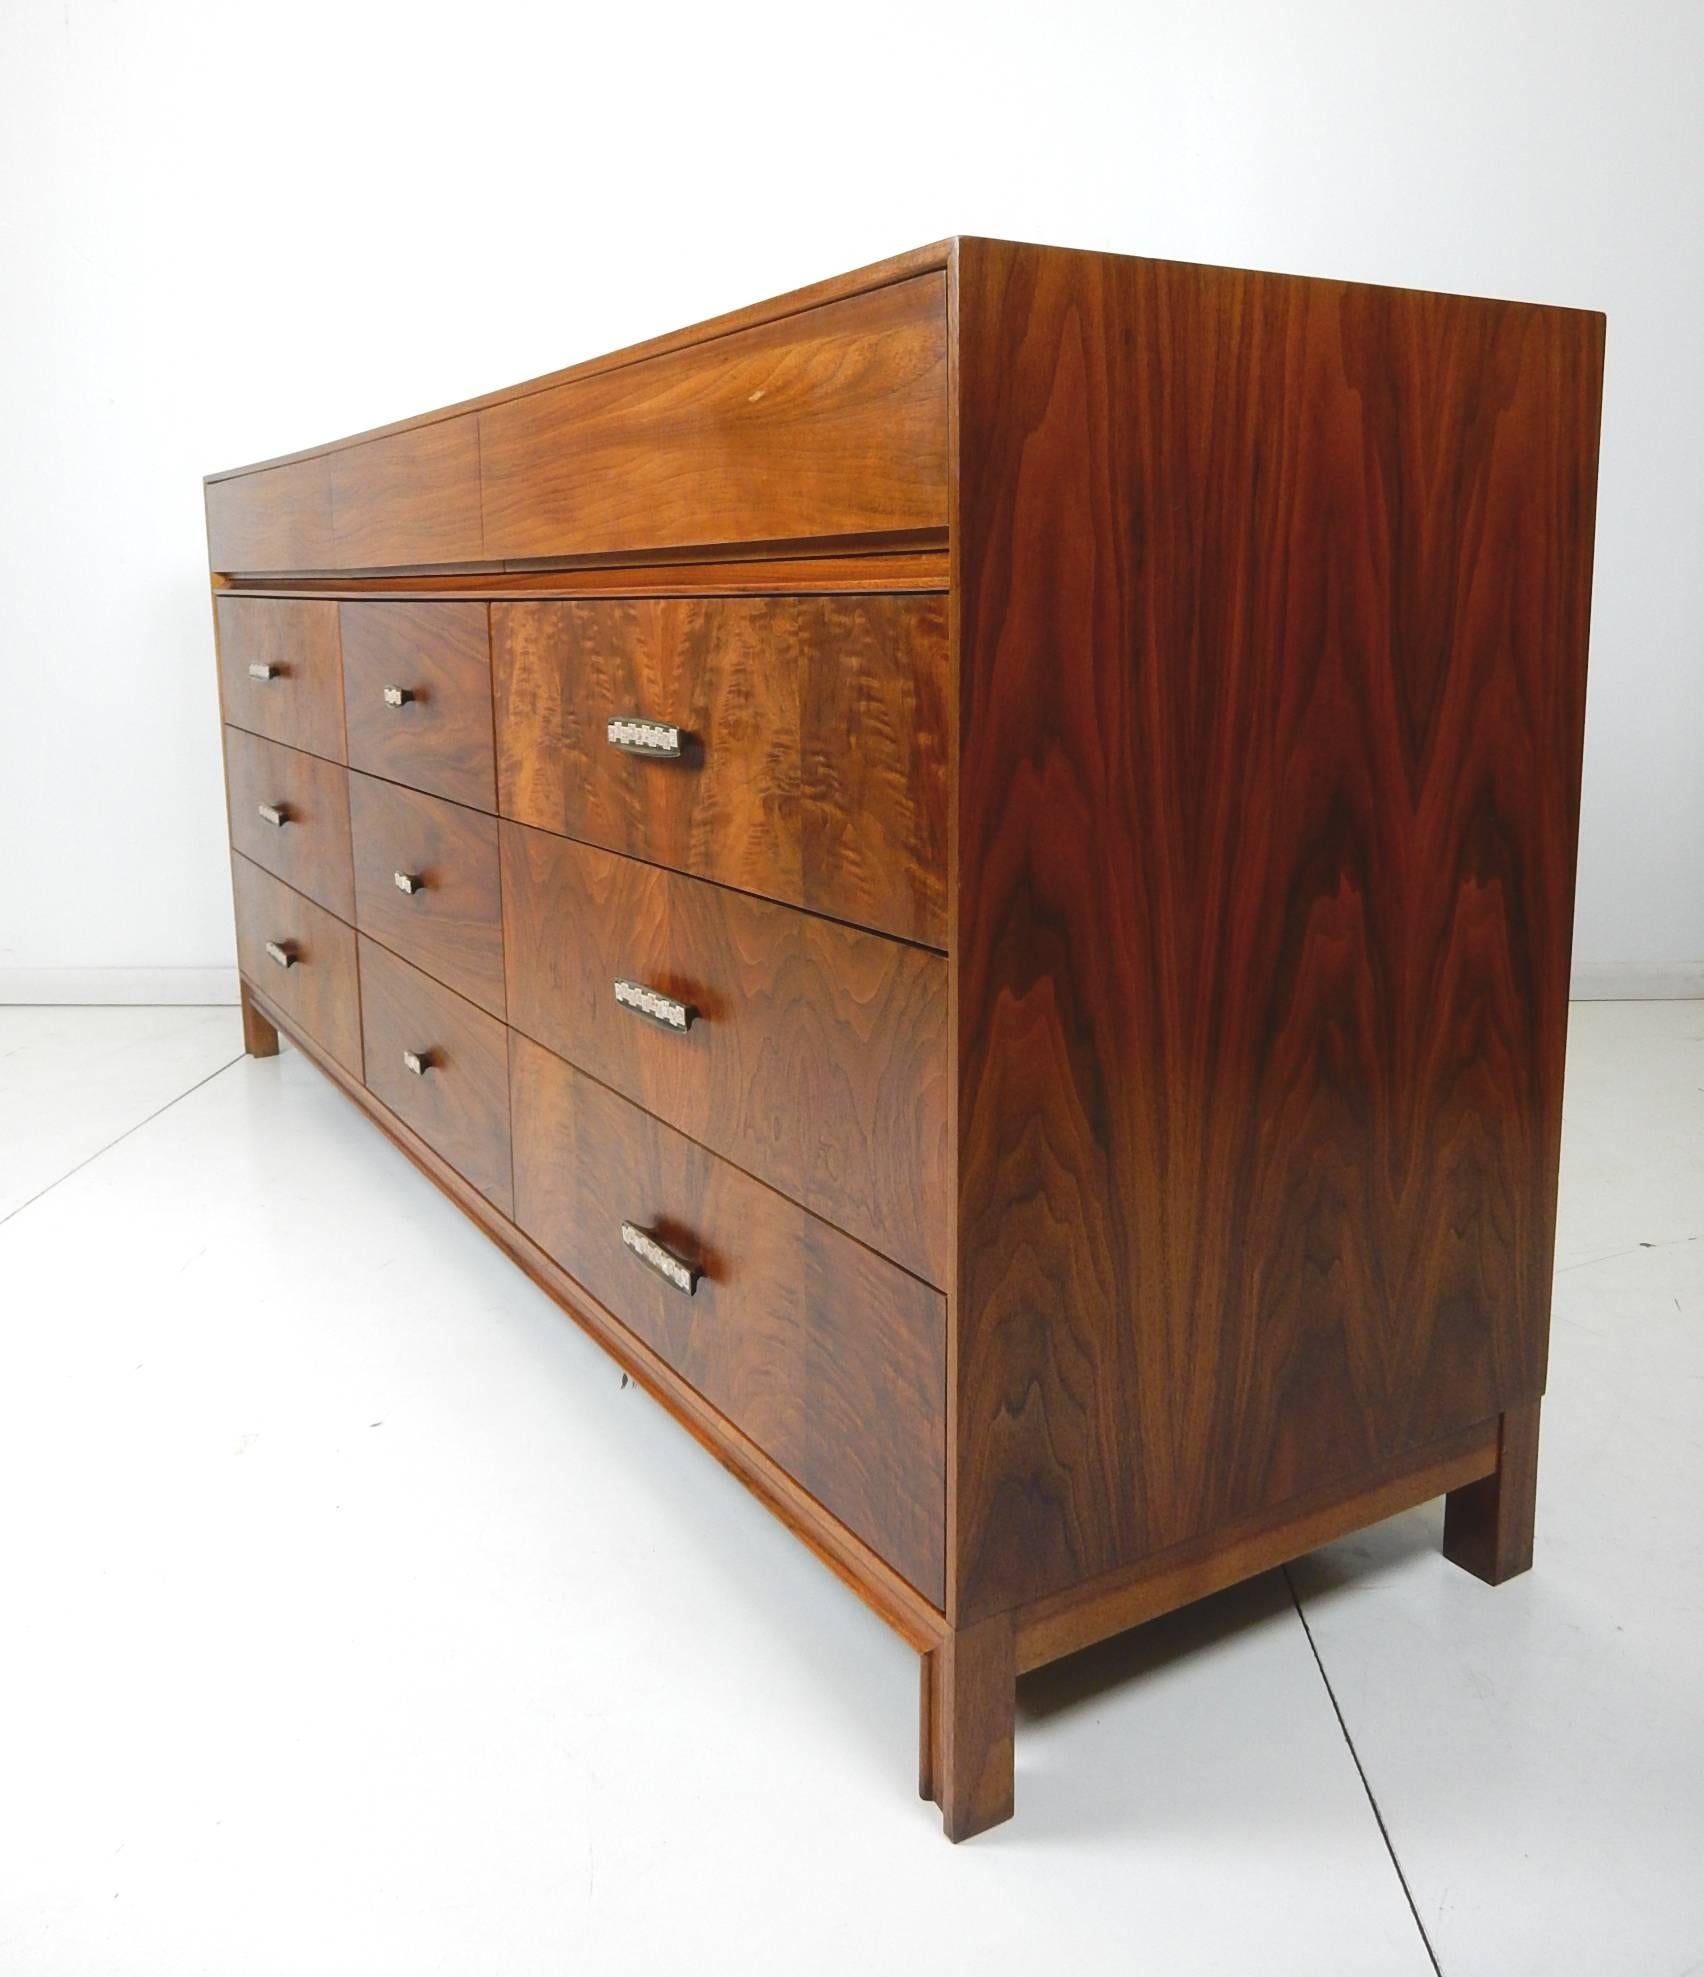 Gorgeous, finely crafted chest of drawers designed by John Keal for Brown-Saltman in the early 1950s.
An astonishing linear design that is beyond captivating. The two-tone wood used has an amazing grain pattern on front, top and sides.
Nine